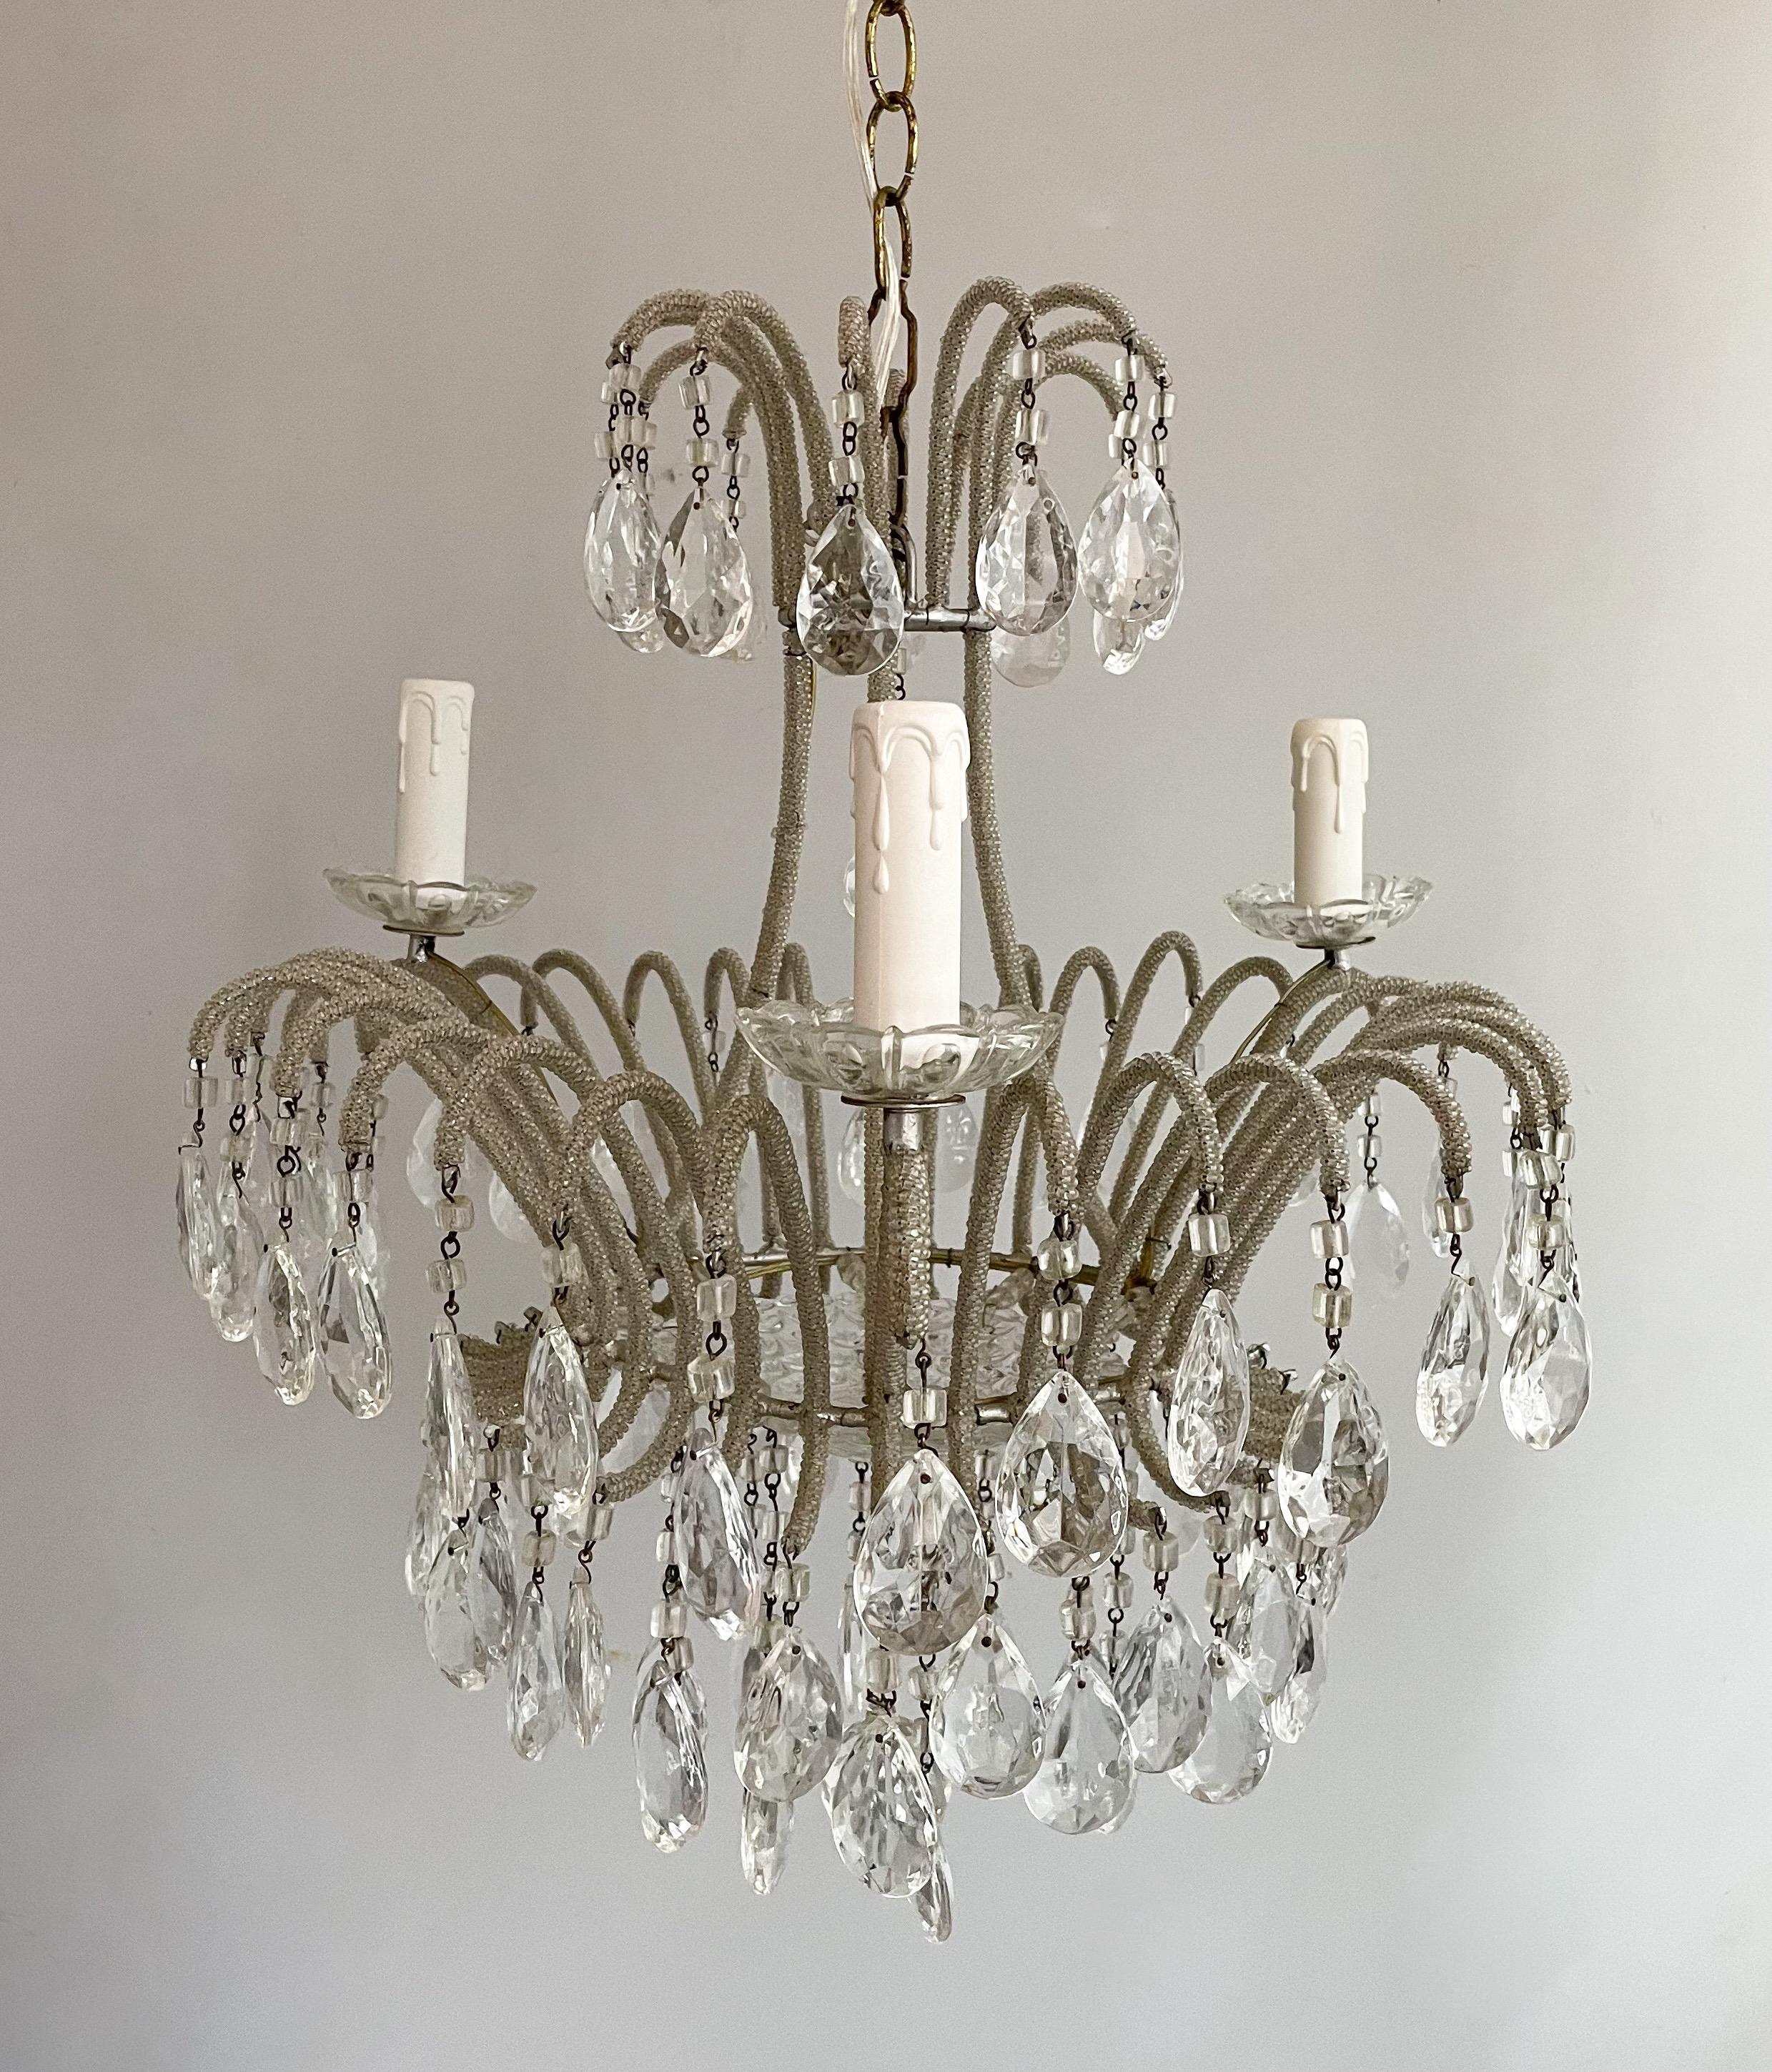 Wonderful, Italian 1940s silvered-iron crystal beaded chandelier. 

The chandelier consists of scrolled iron frame wrapped in tiny silvered glass beads and decorated with clear faceted prisms hanging from macaroni glass beads. There’s a decorative